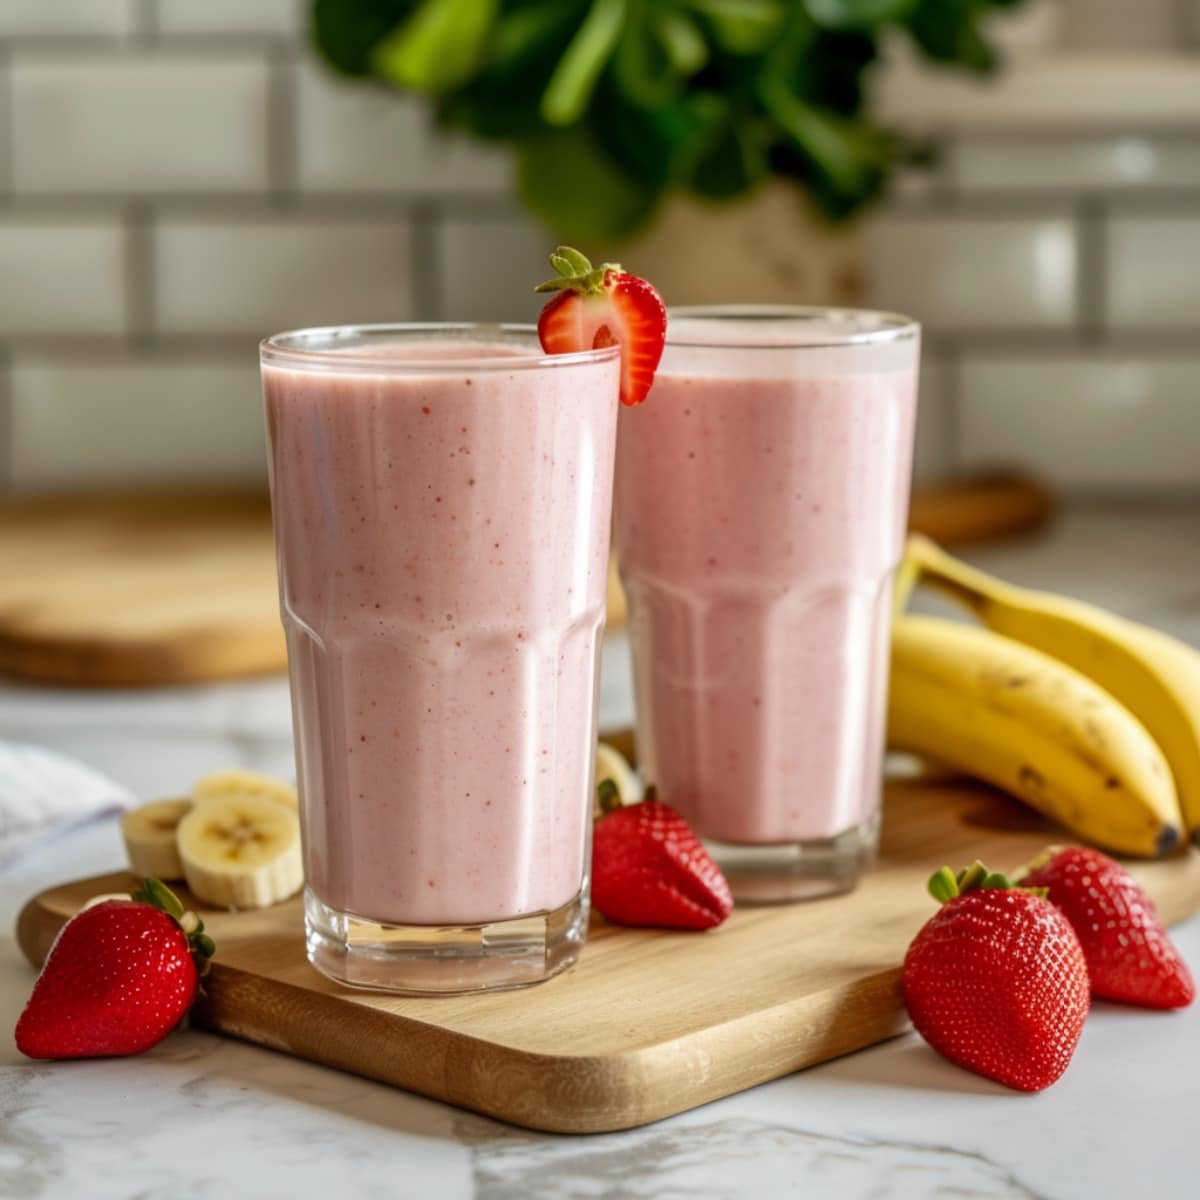 Strawberry Banana Smoothies on a chopping board with strawberries and bananas